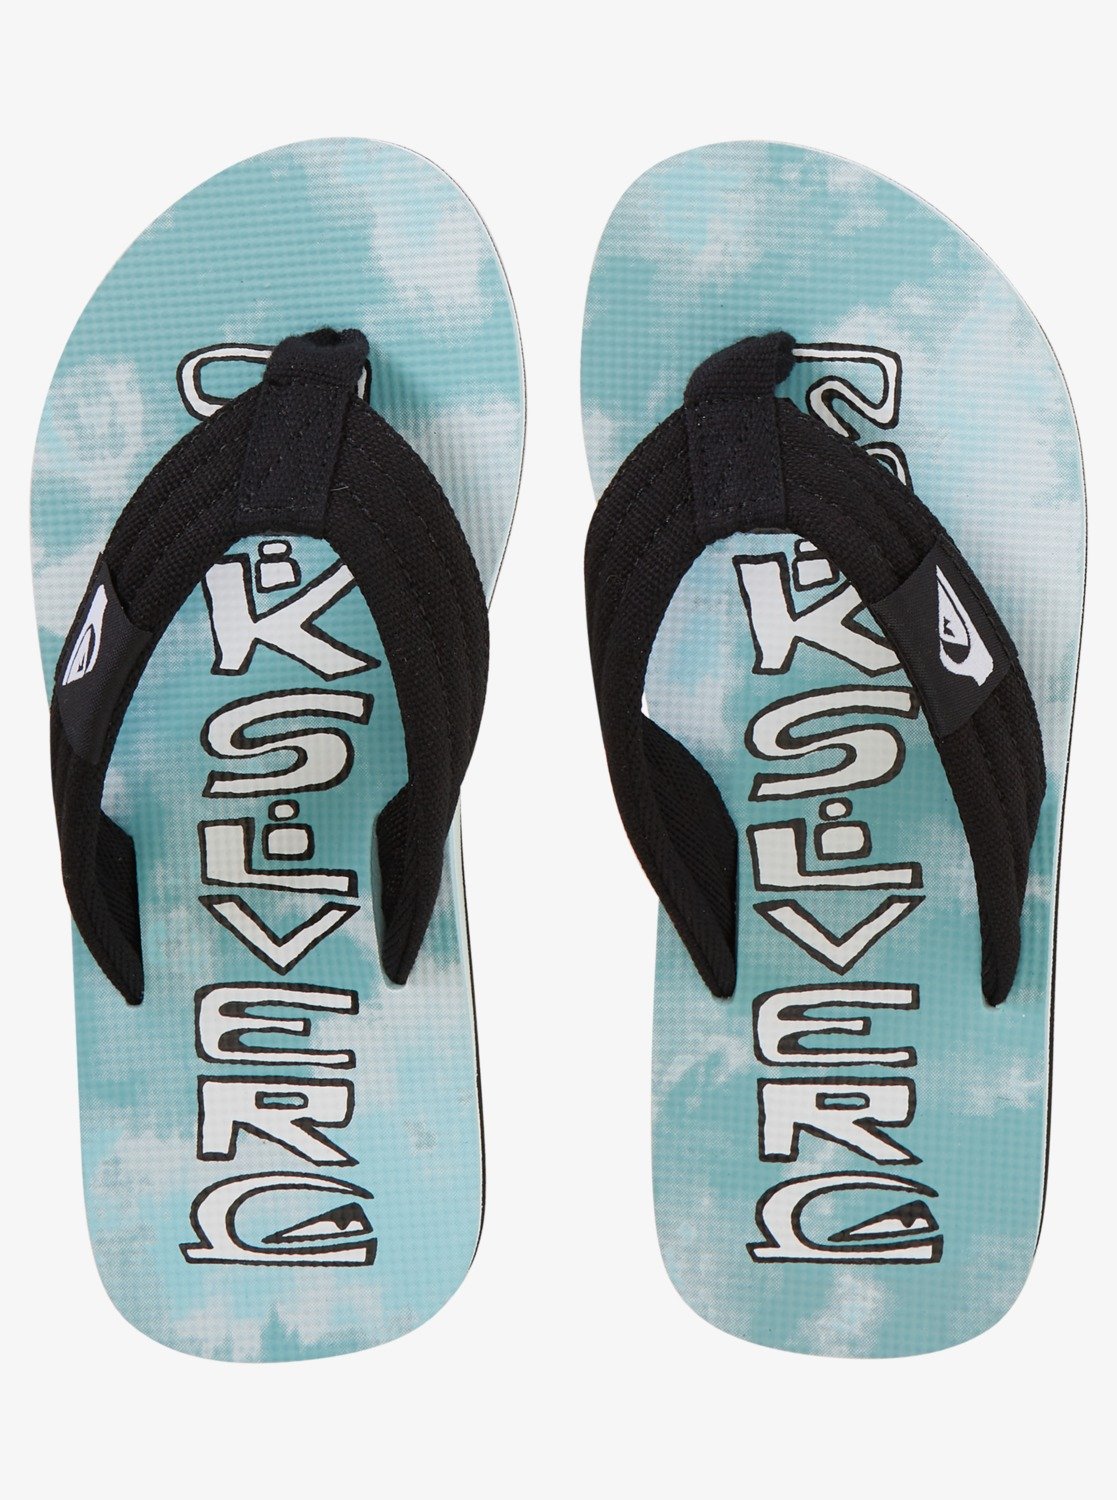 Quiksilver Molokai Layback Youth Sandal BYJ1-Blue 1 12 C